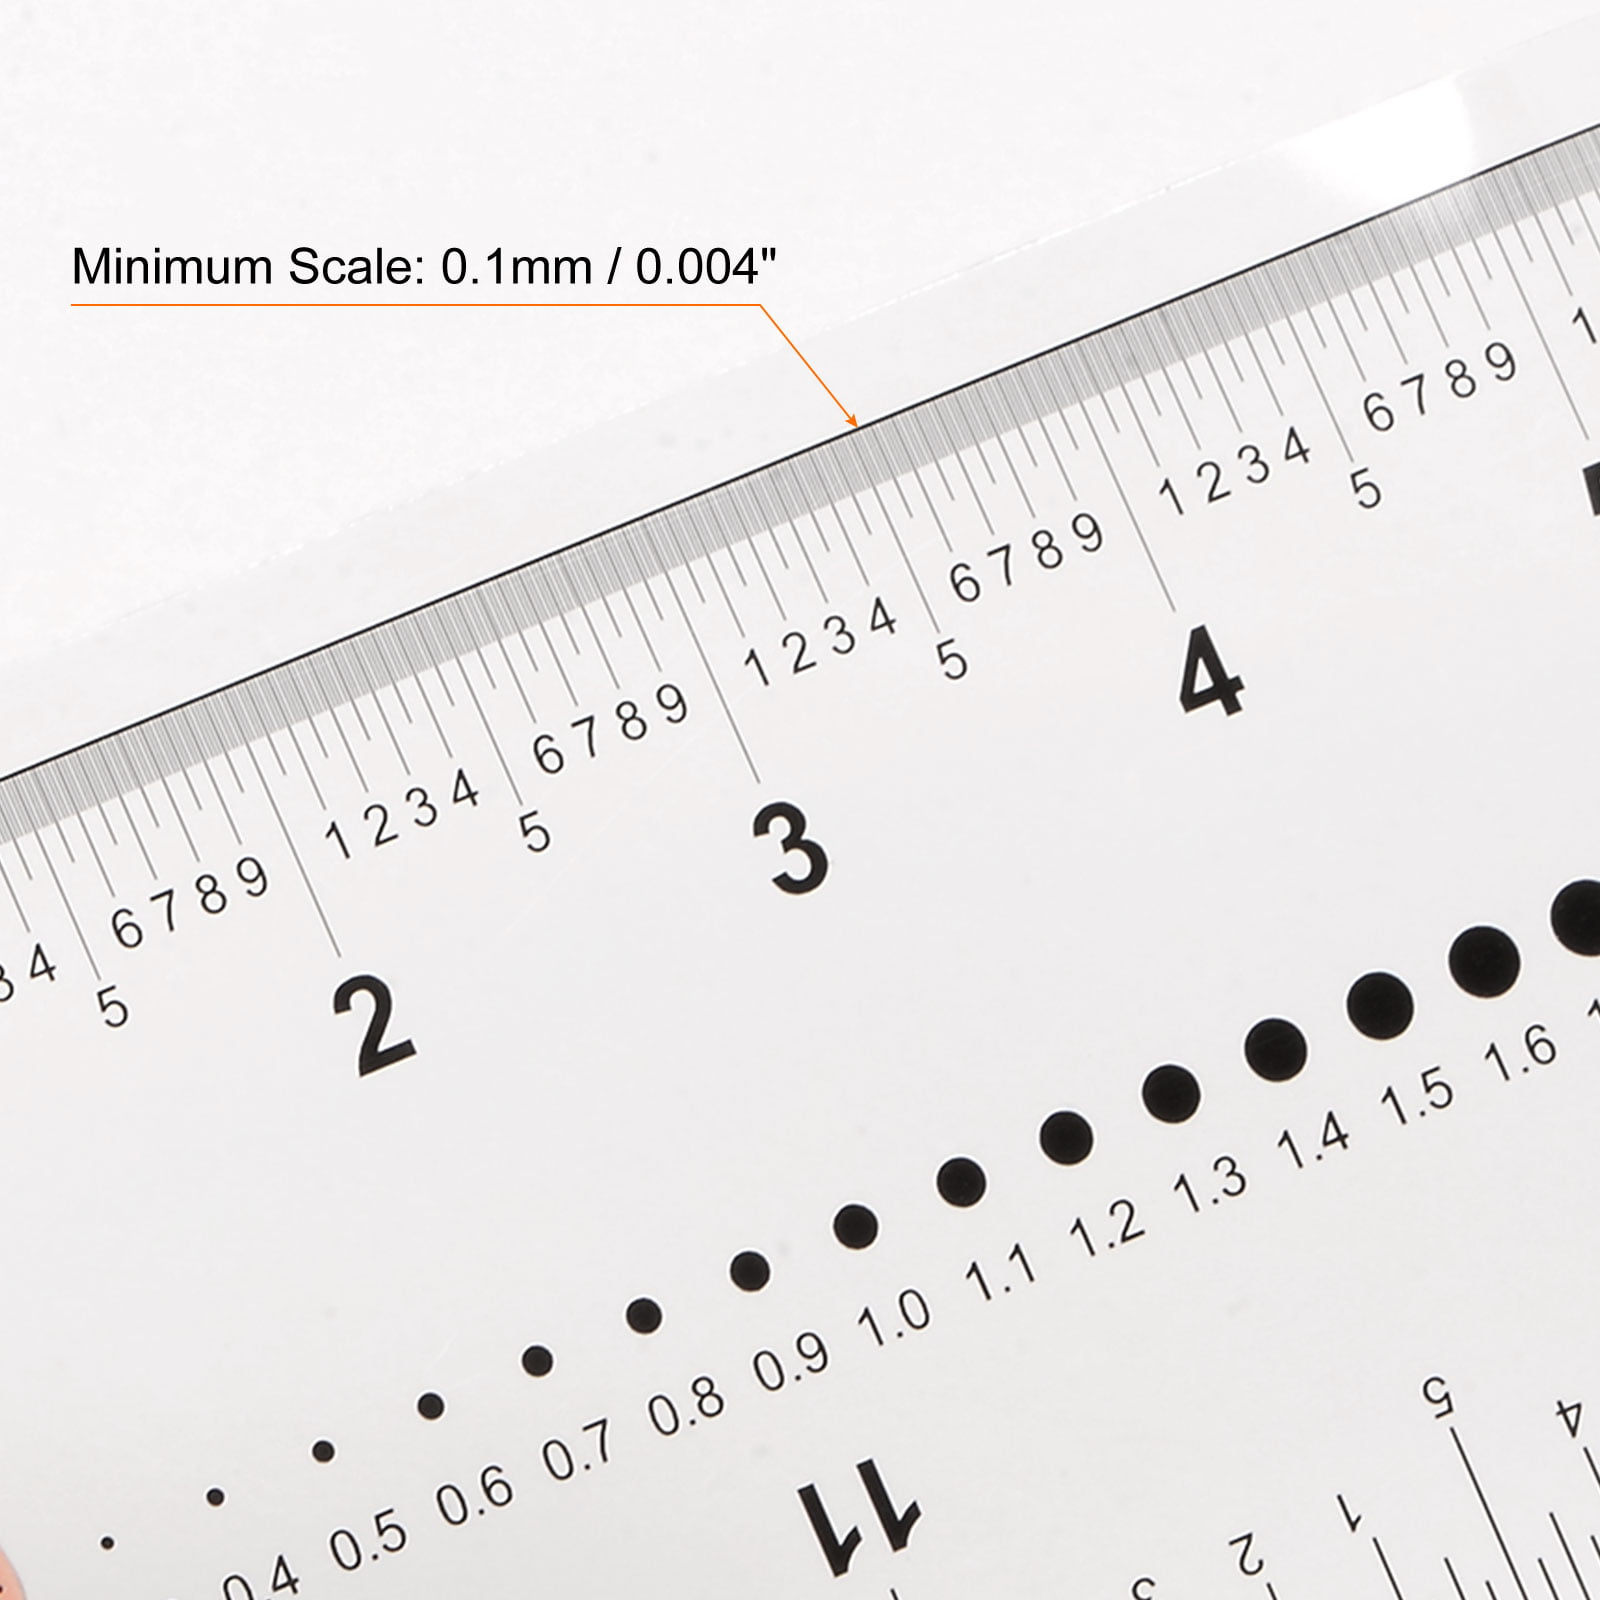 Plastic Rulers with Magnifying Glass (12 Inch) - Rulers with Logo - Q637411  QI